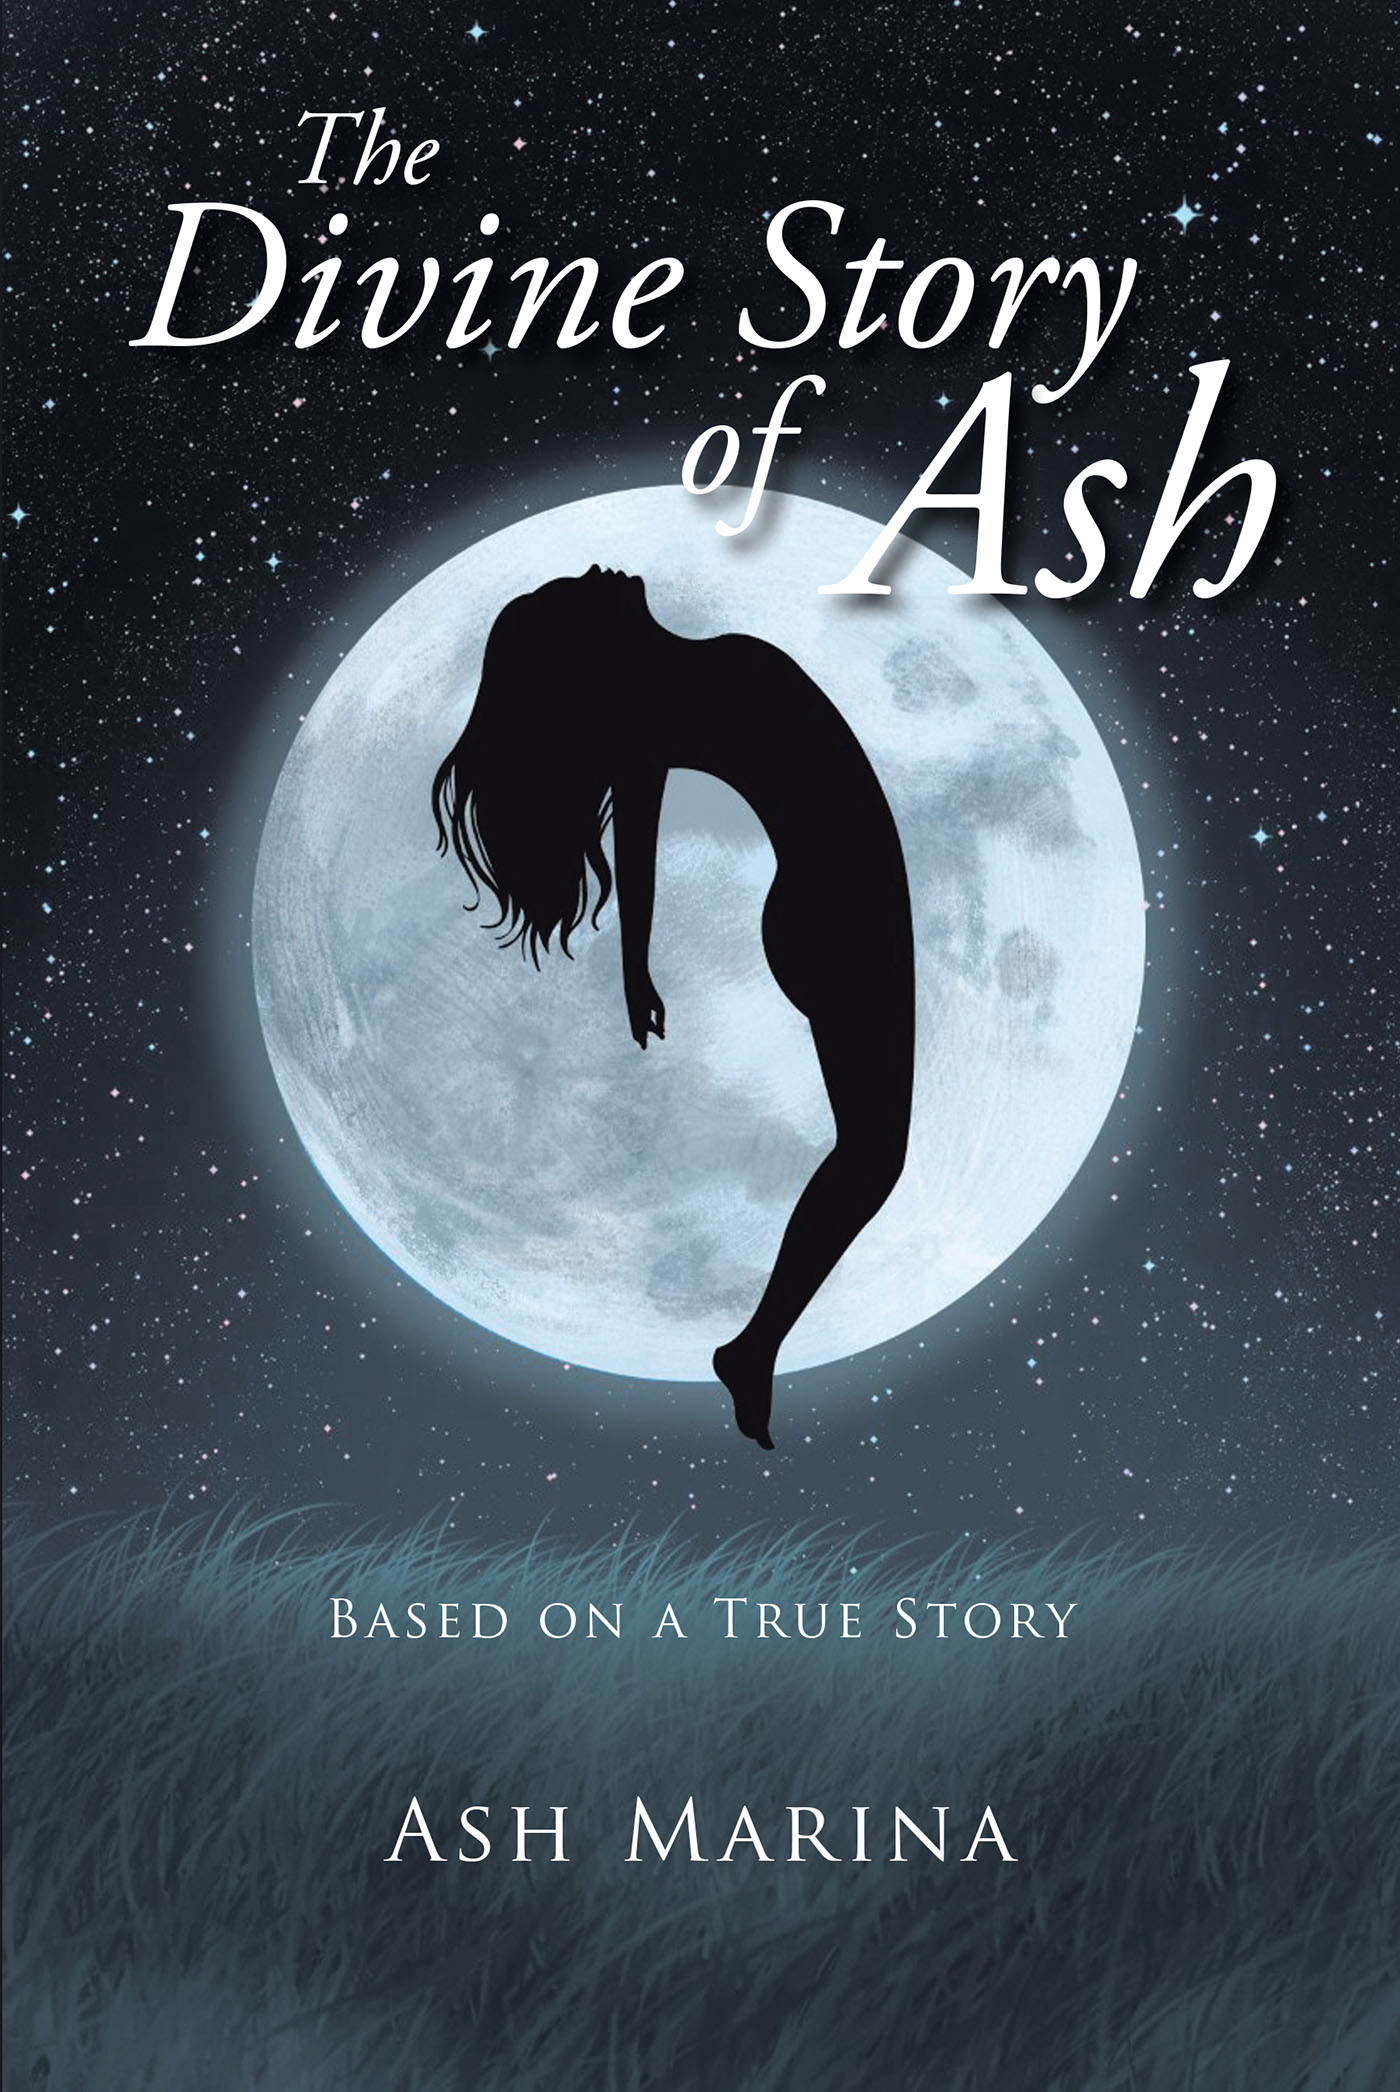 Ash Marina’s Newly Released “The Divine Story of Ash: Based on a True Story” is an Engaging Look Into the Author’s Personal and Spiritual Journey